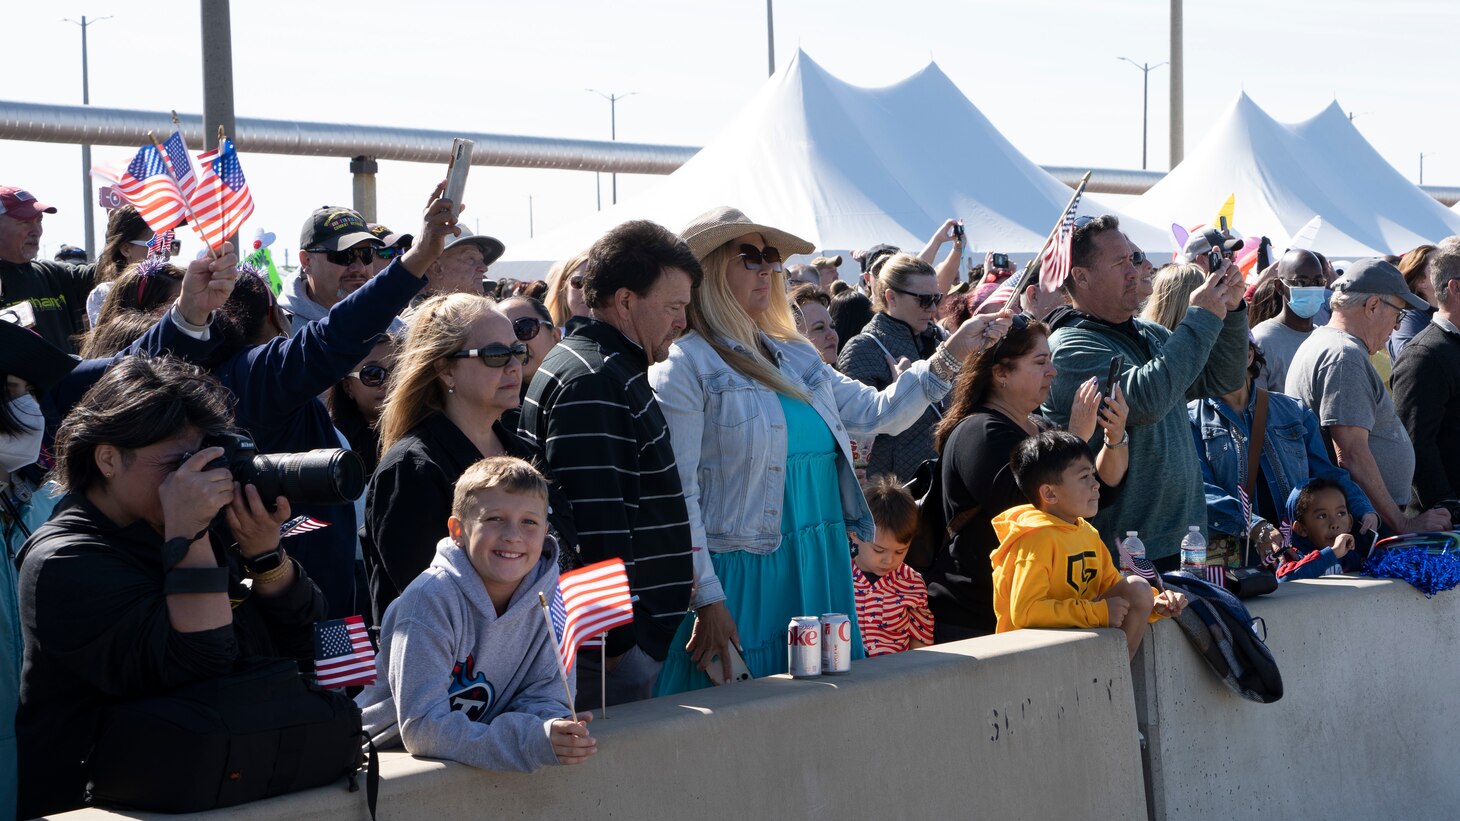 NORFOLK, Va. (April 23, 2023) Families watch the Nimitz-class aircraft carrier USS George H.W. Bush (CVN 77), along with the staff of carrier Strike Group (CSG) 10, as it returns to Naval Station Norfolk following an eight-month deployment, April 23, 2023. The George H.W. Bush CSG was deployed to the U.S. Naval Forces Europe area of operations, employed by U.S. Sixth Fleet to defend U.S., allied and partner interests. (U.S. Navy photo by Mass Communication Specialist 2nd Class Anderson W. Branch)